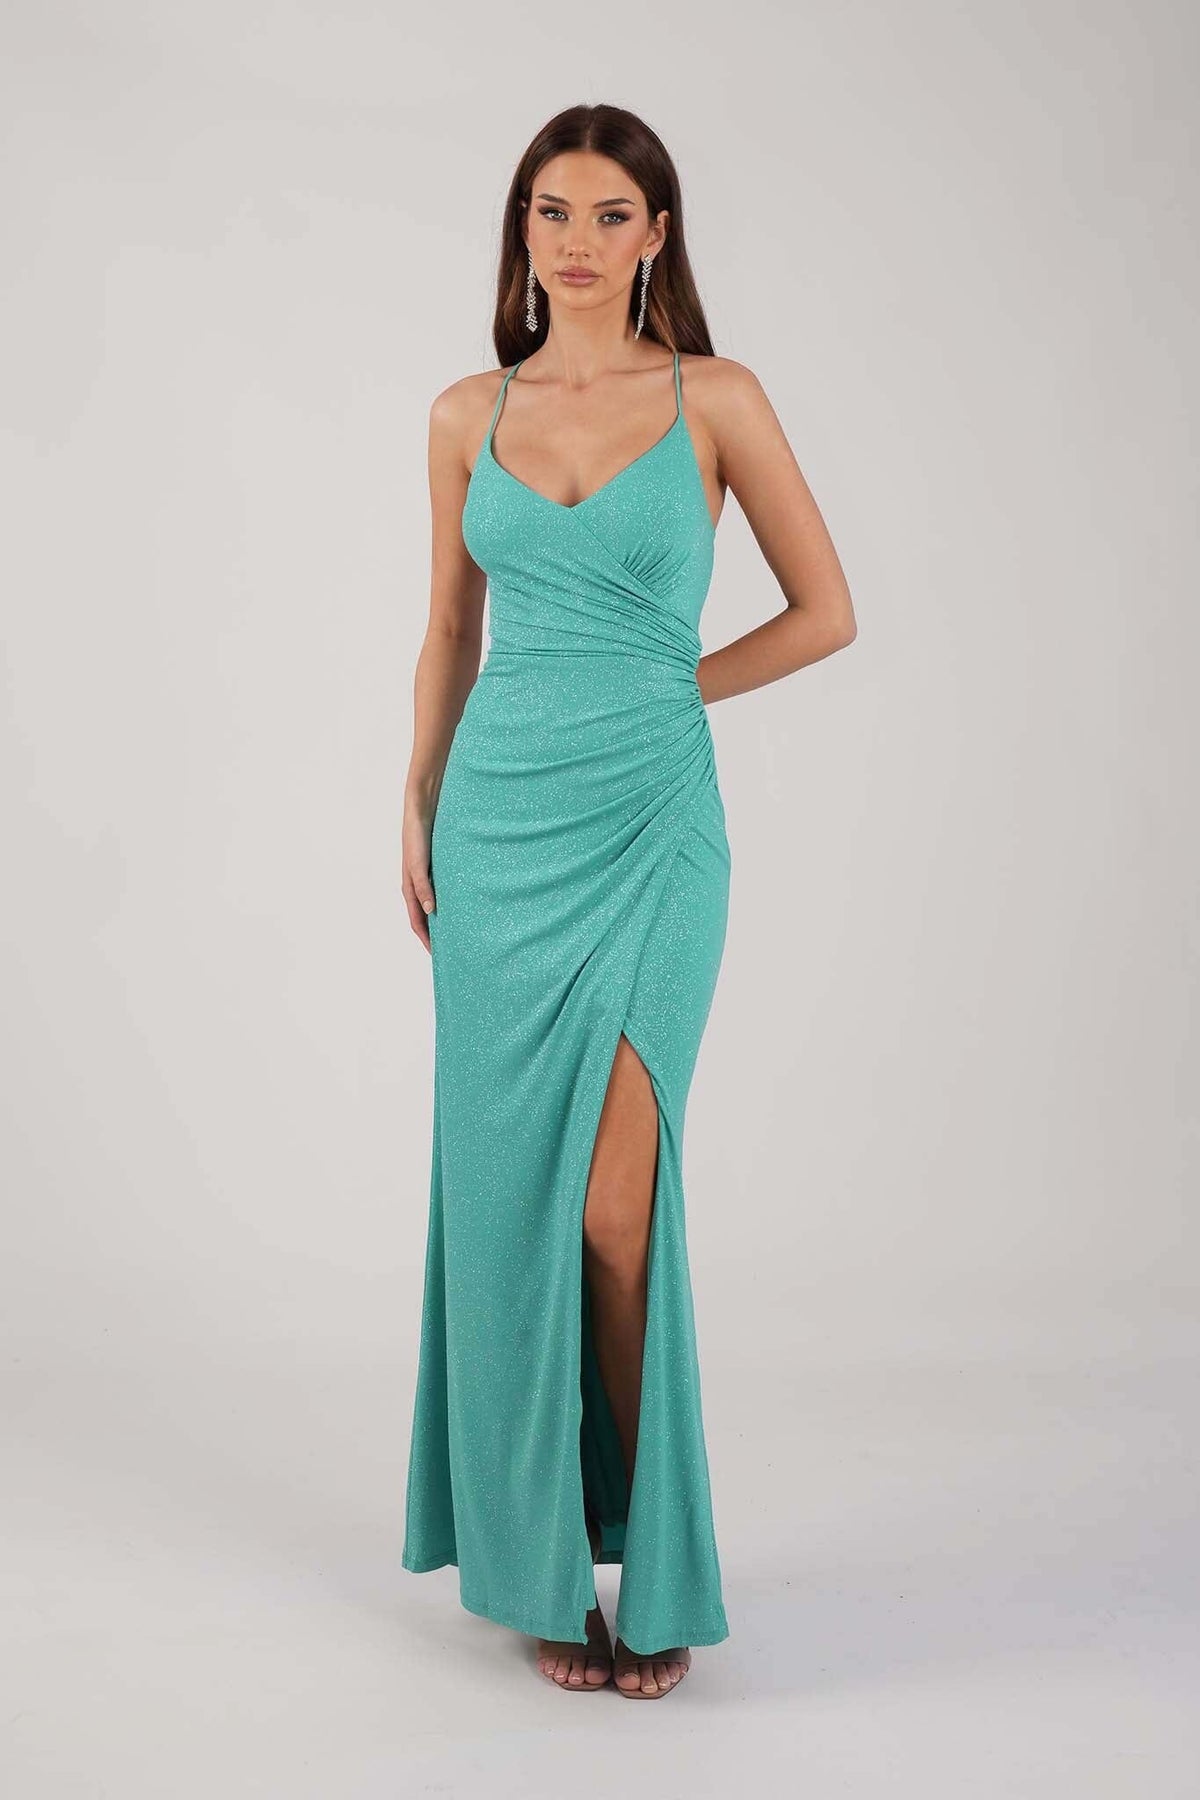 Mint Green Shimmer Evening Gown with V Neckline, Thin Straps, Gathered Detail and Side Slit